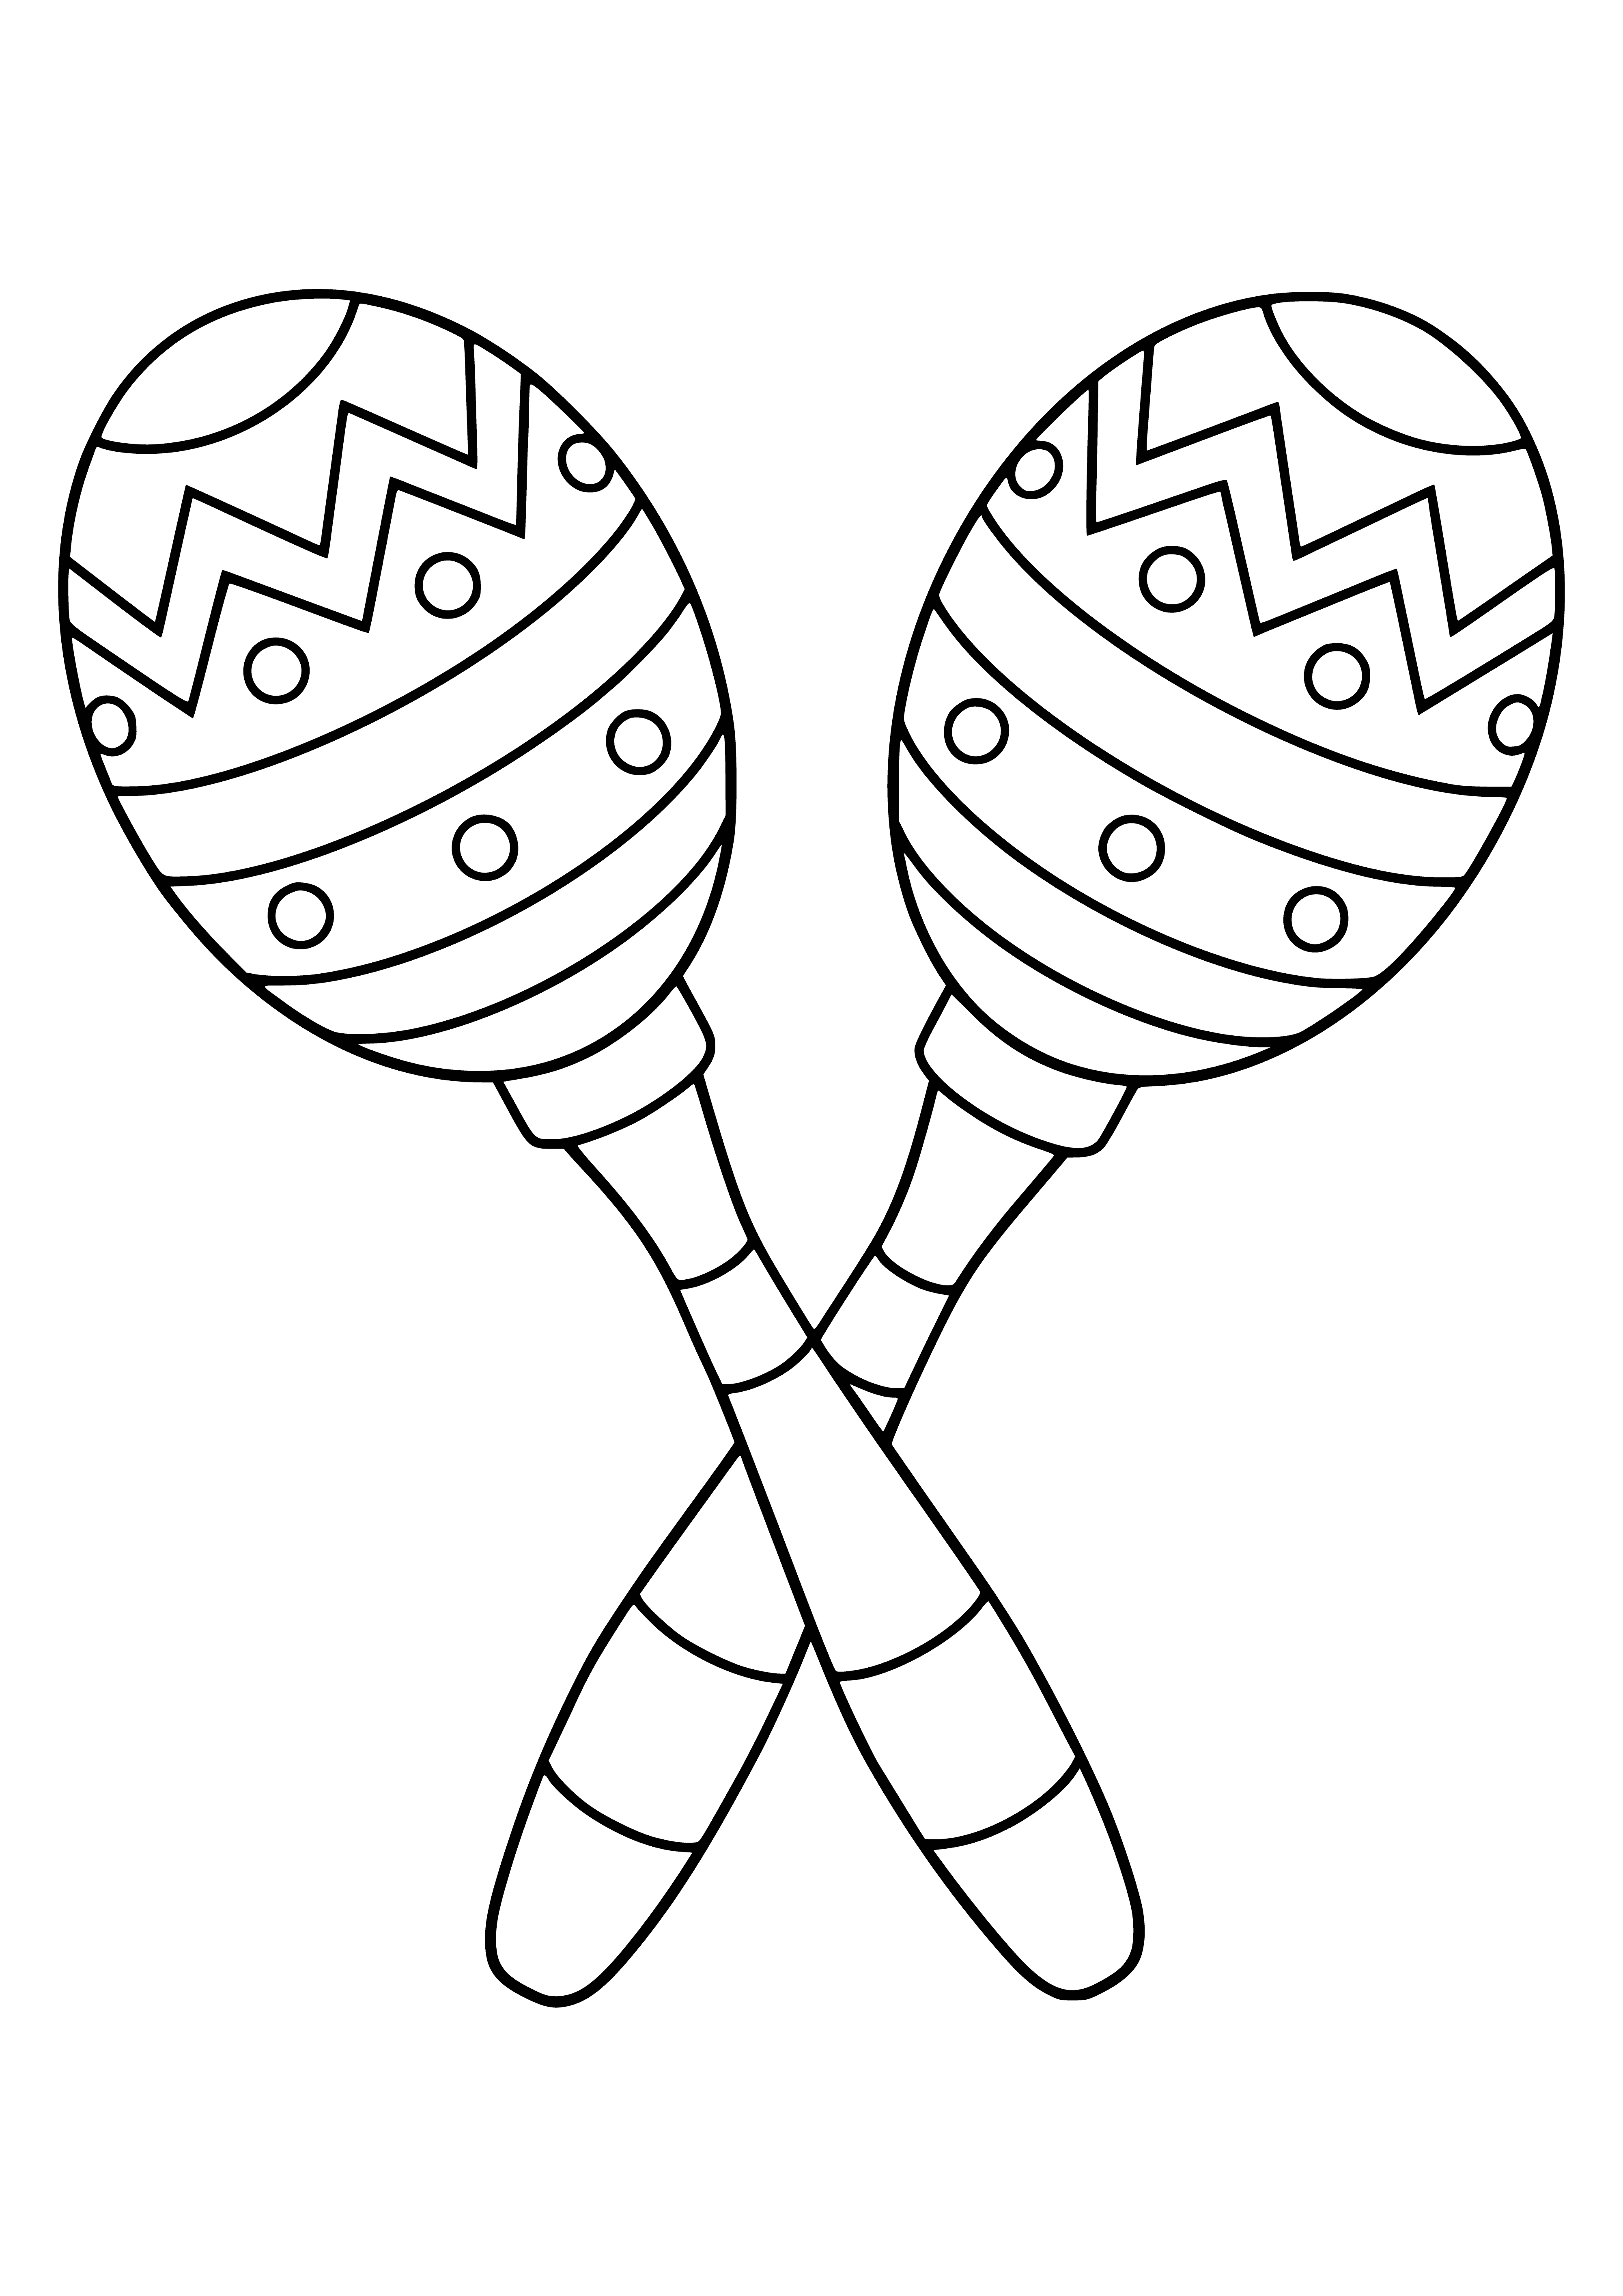 coloring page: Maracas are percussion instruments made from gourds with handles, used to make a variety of musical genres.